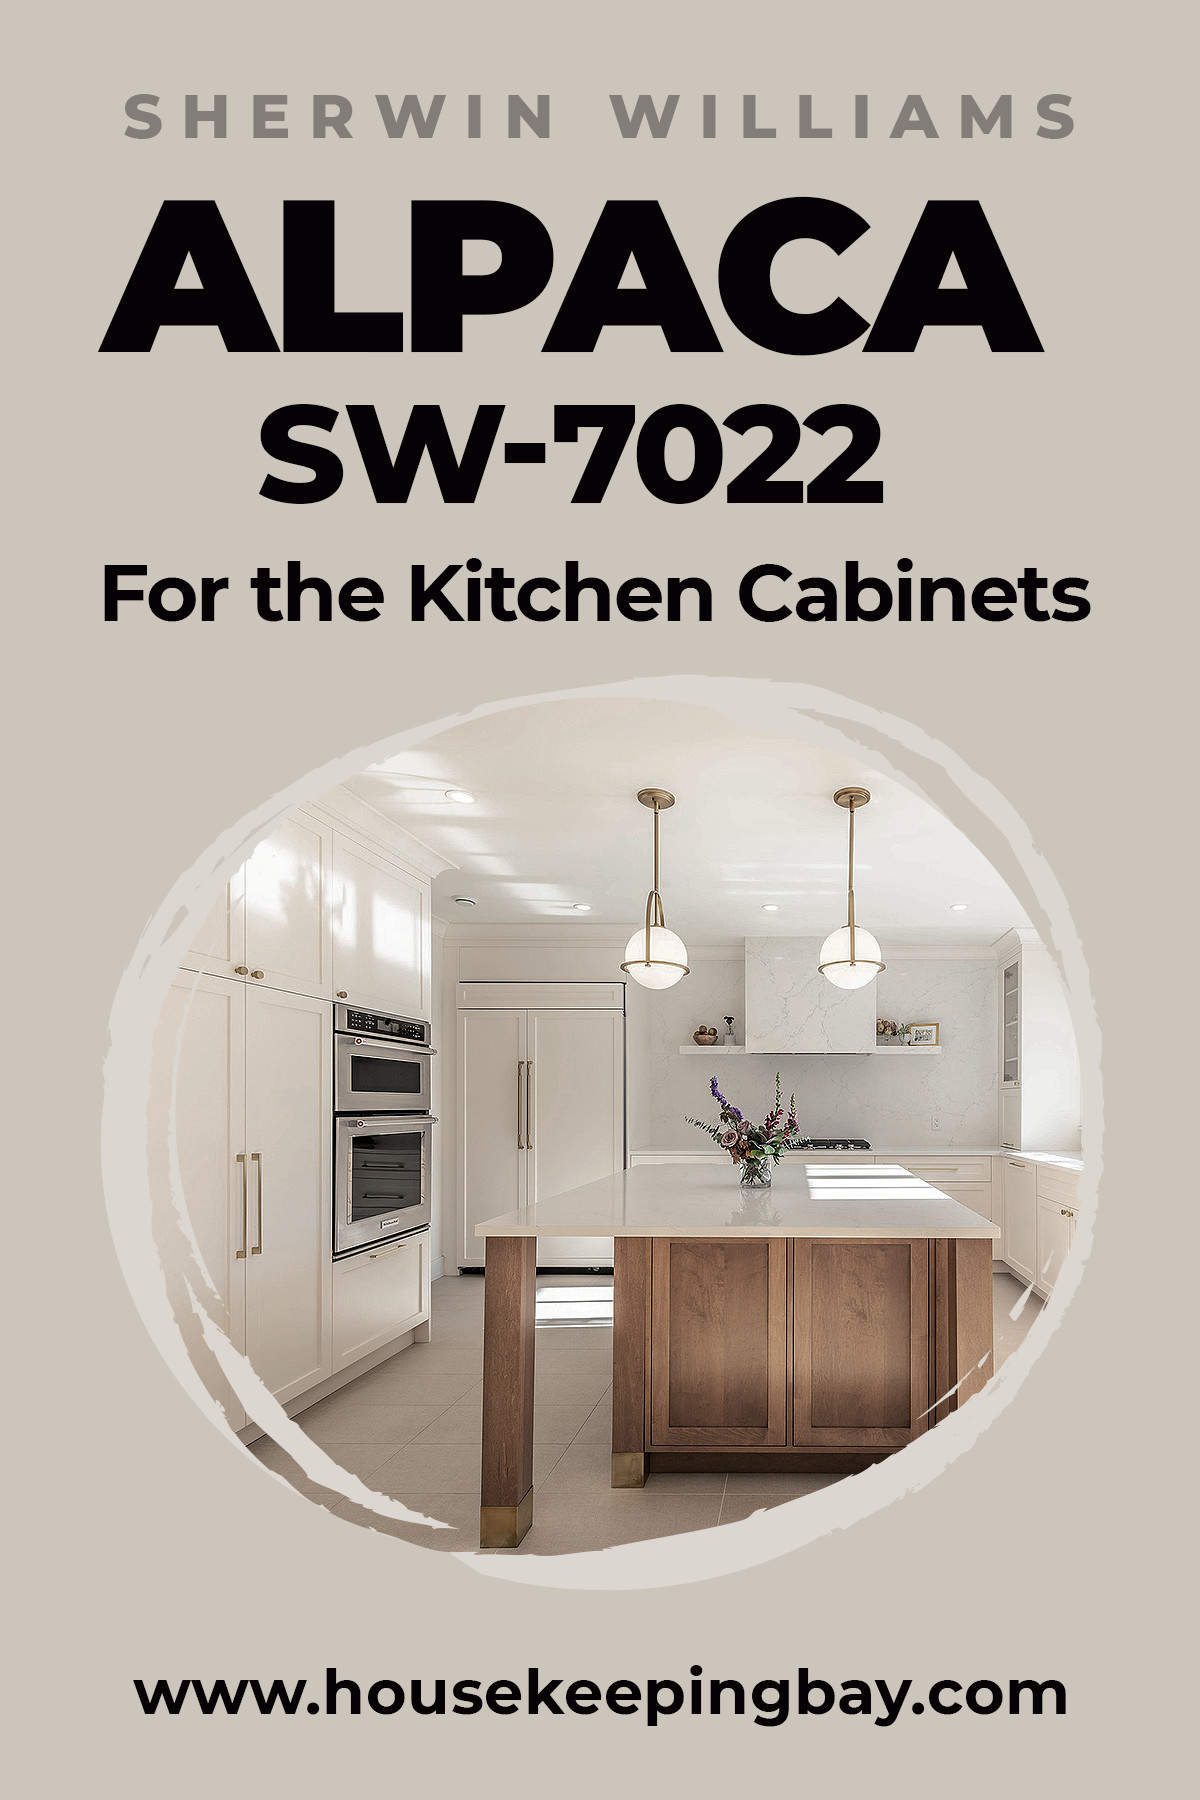 Alpaca SW 7022 By Sherwin Williams for the kitchen cabinets